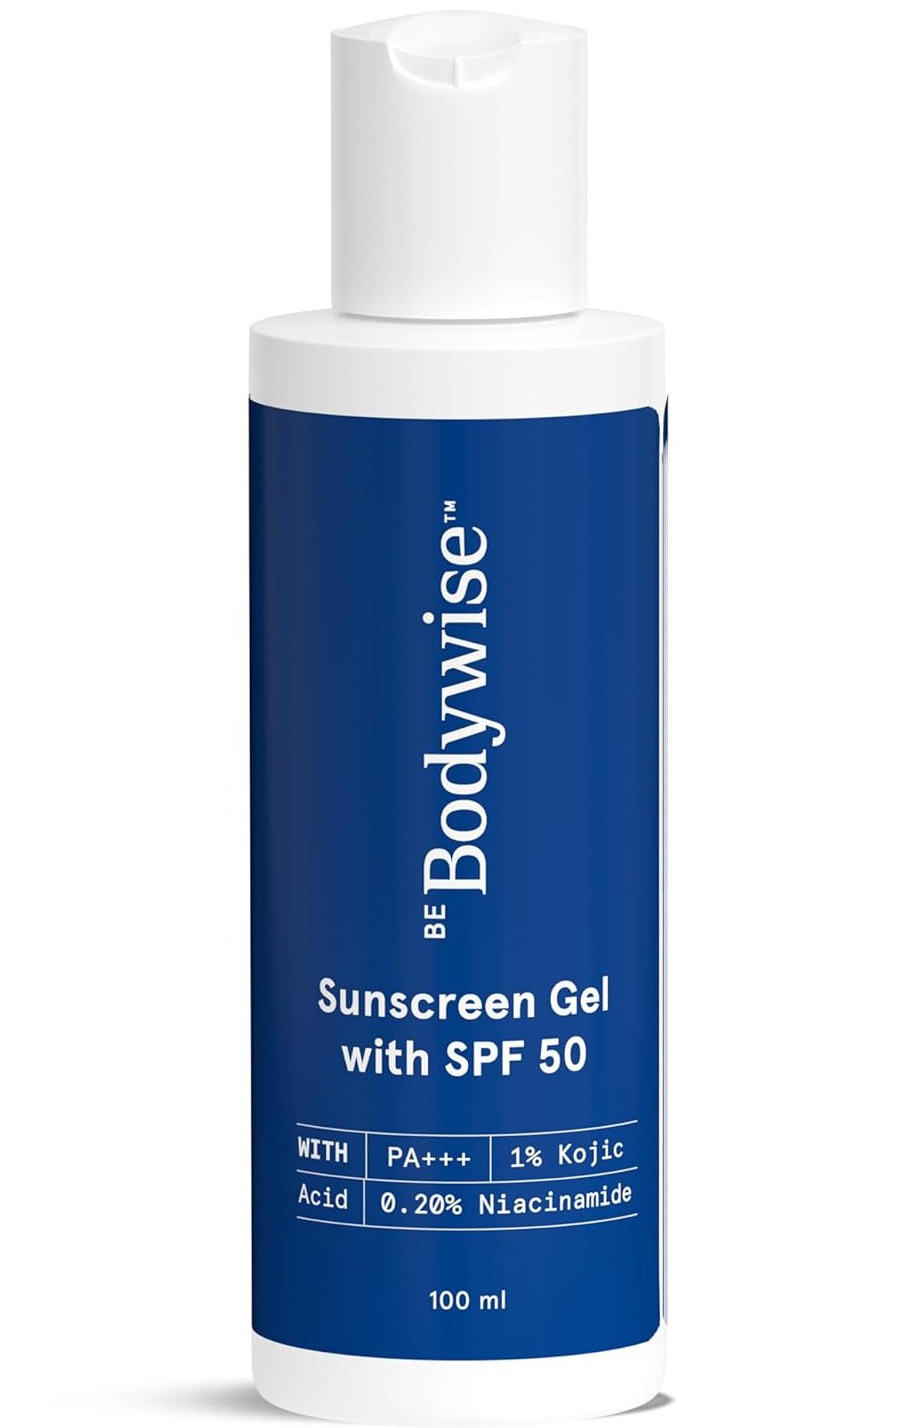 Be Bodywise Sunscreen Gel SPF 50 With 1% Kojic Acid